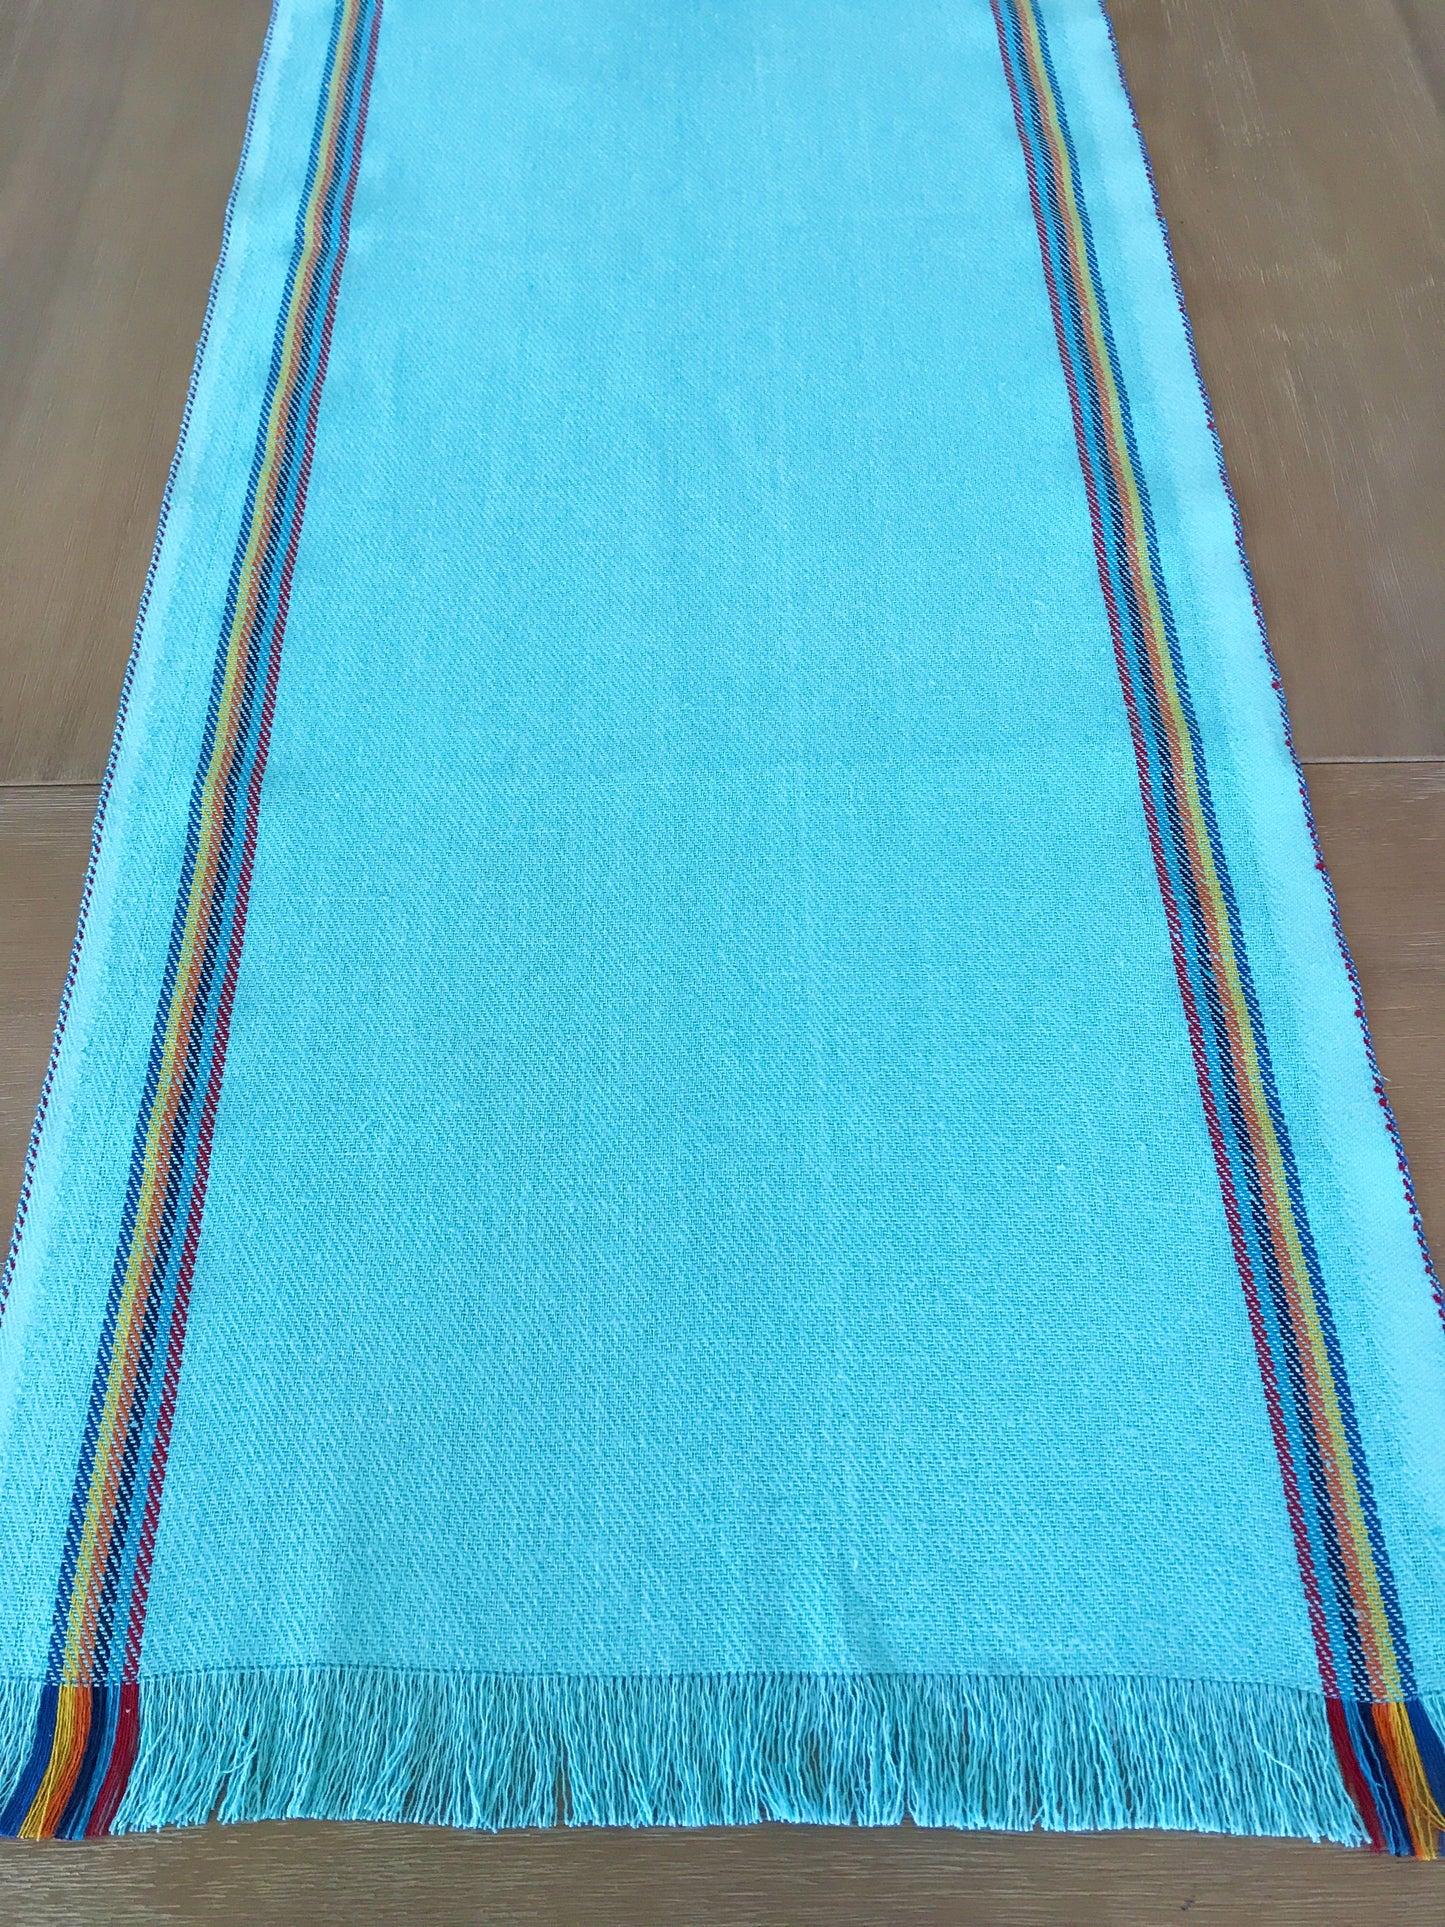 Mexican turquoise jerga table runner